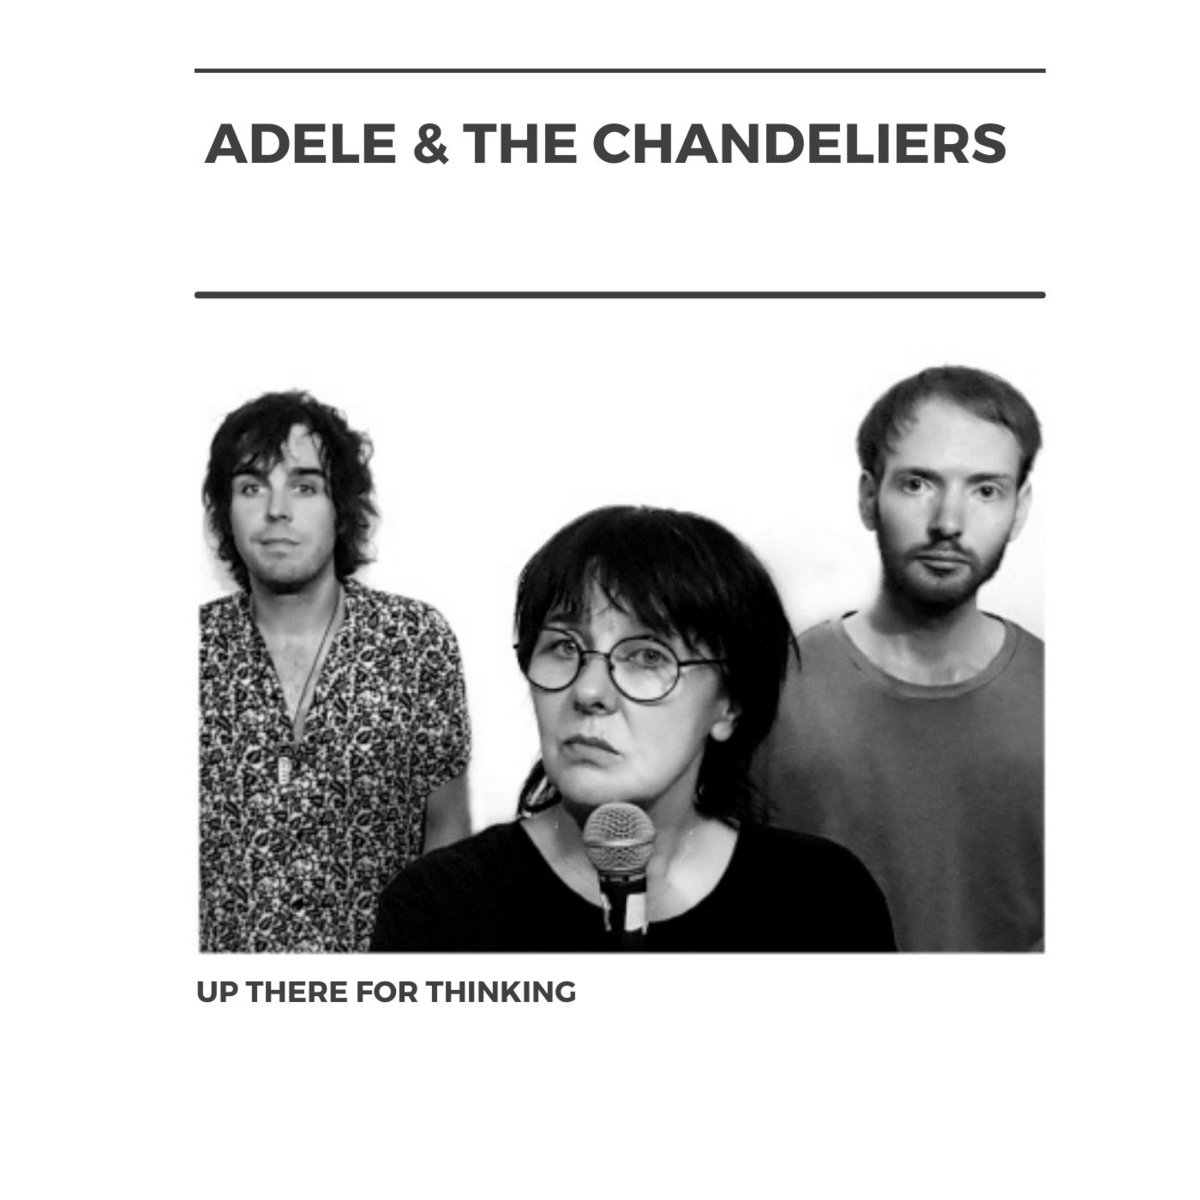 Adele and the changeliers single cover pic